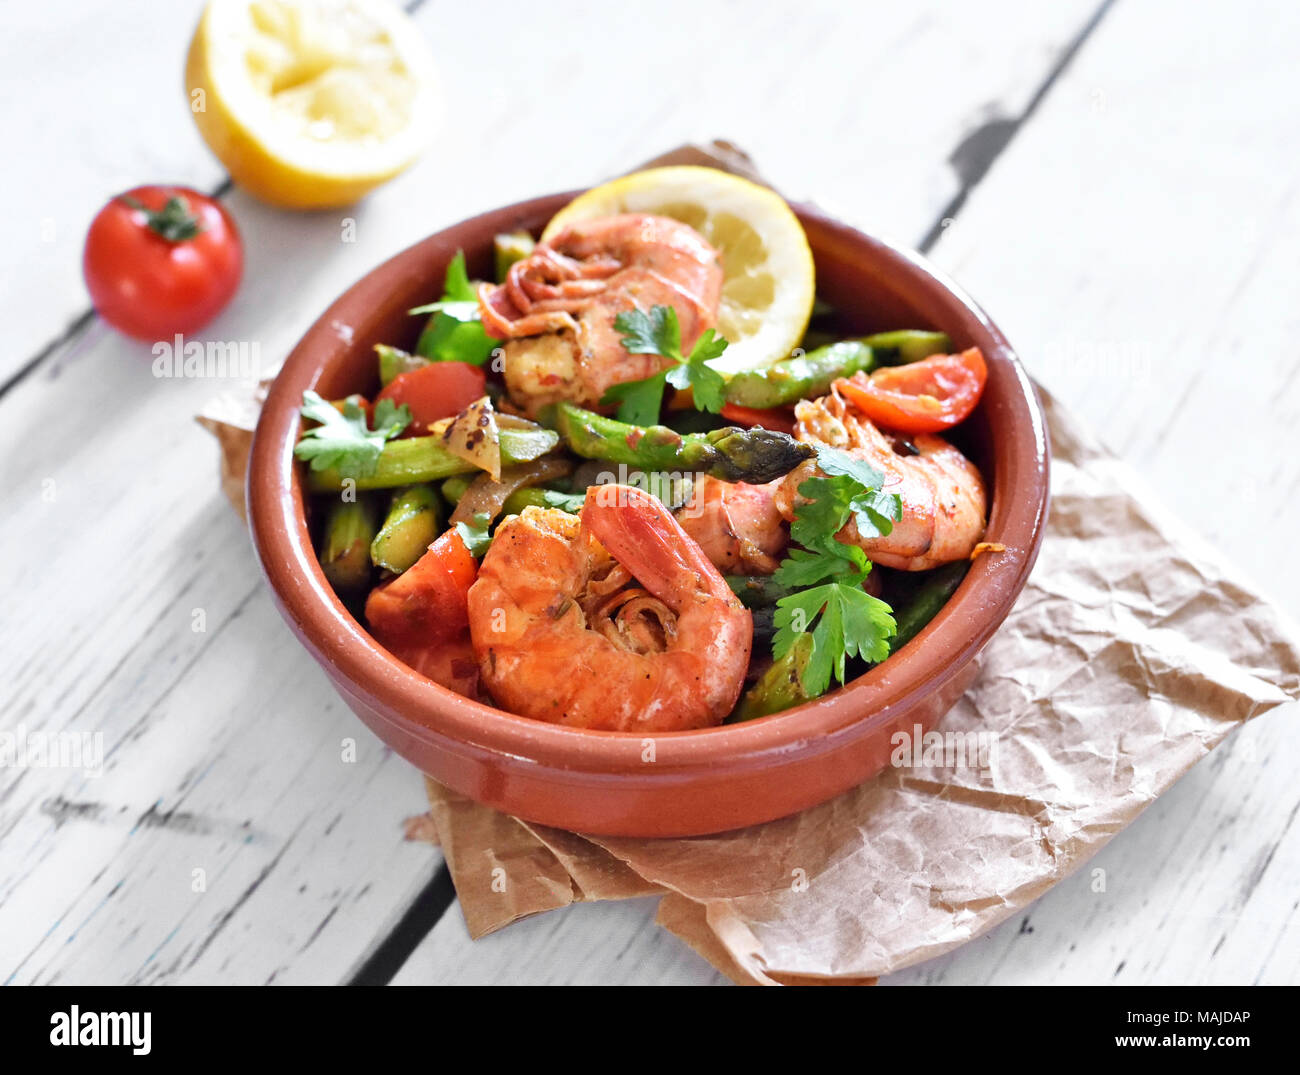 Fresh tapas plate with shrimps and green asparagus, lemon slice and parsley. Gourmet dish on a white wooden table. Stock Photo